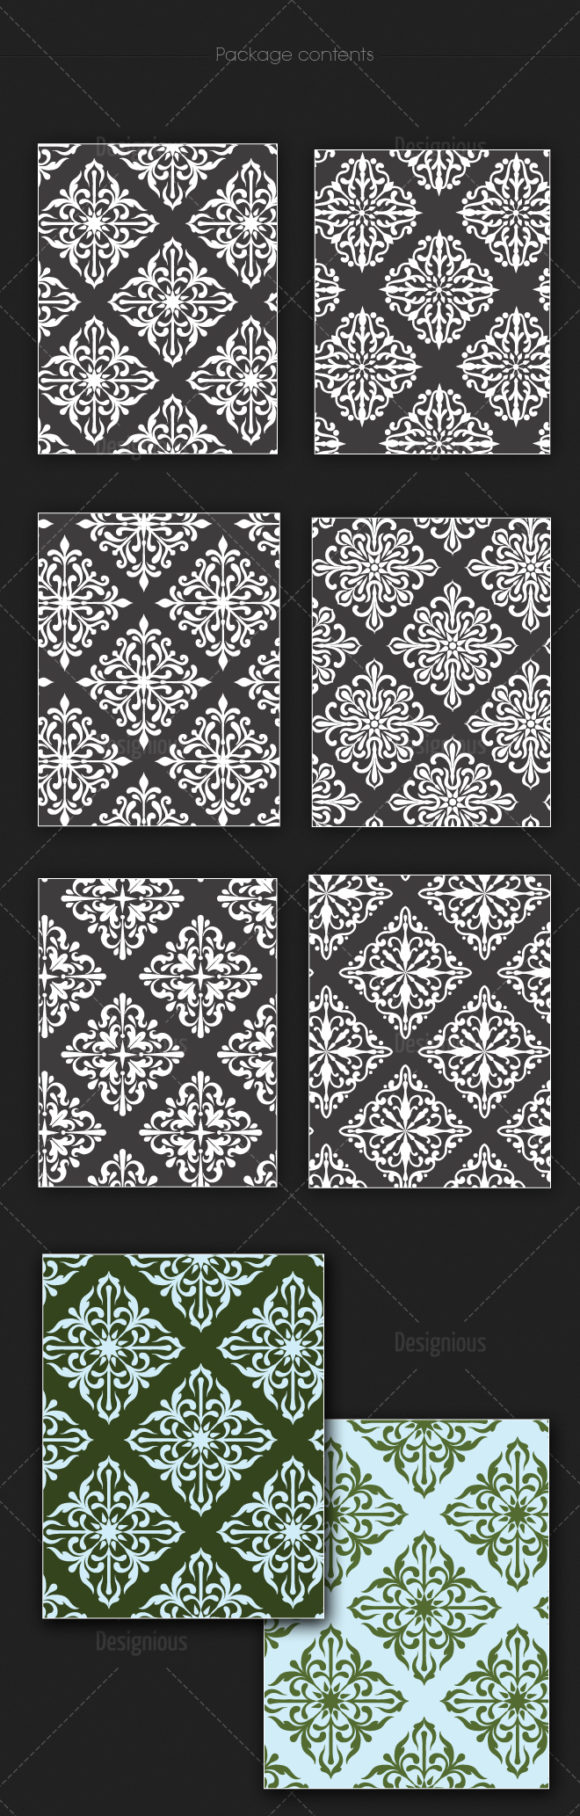 Seamless Patterns Vector Pack 141 2